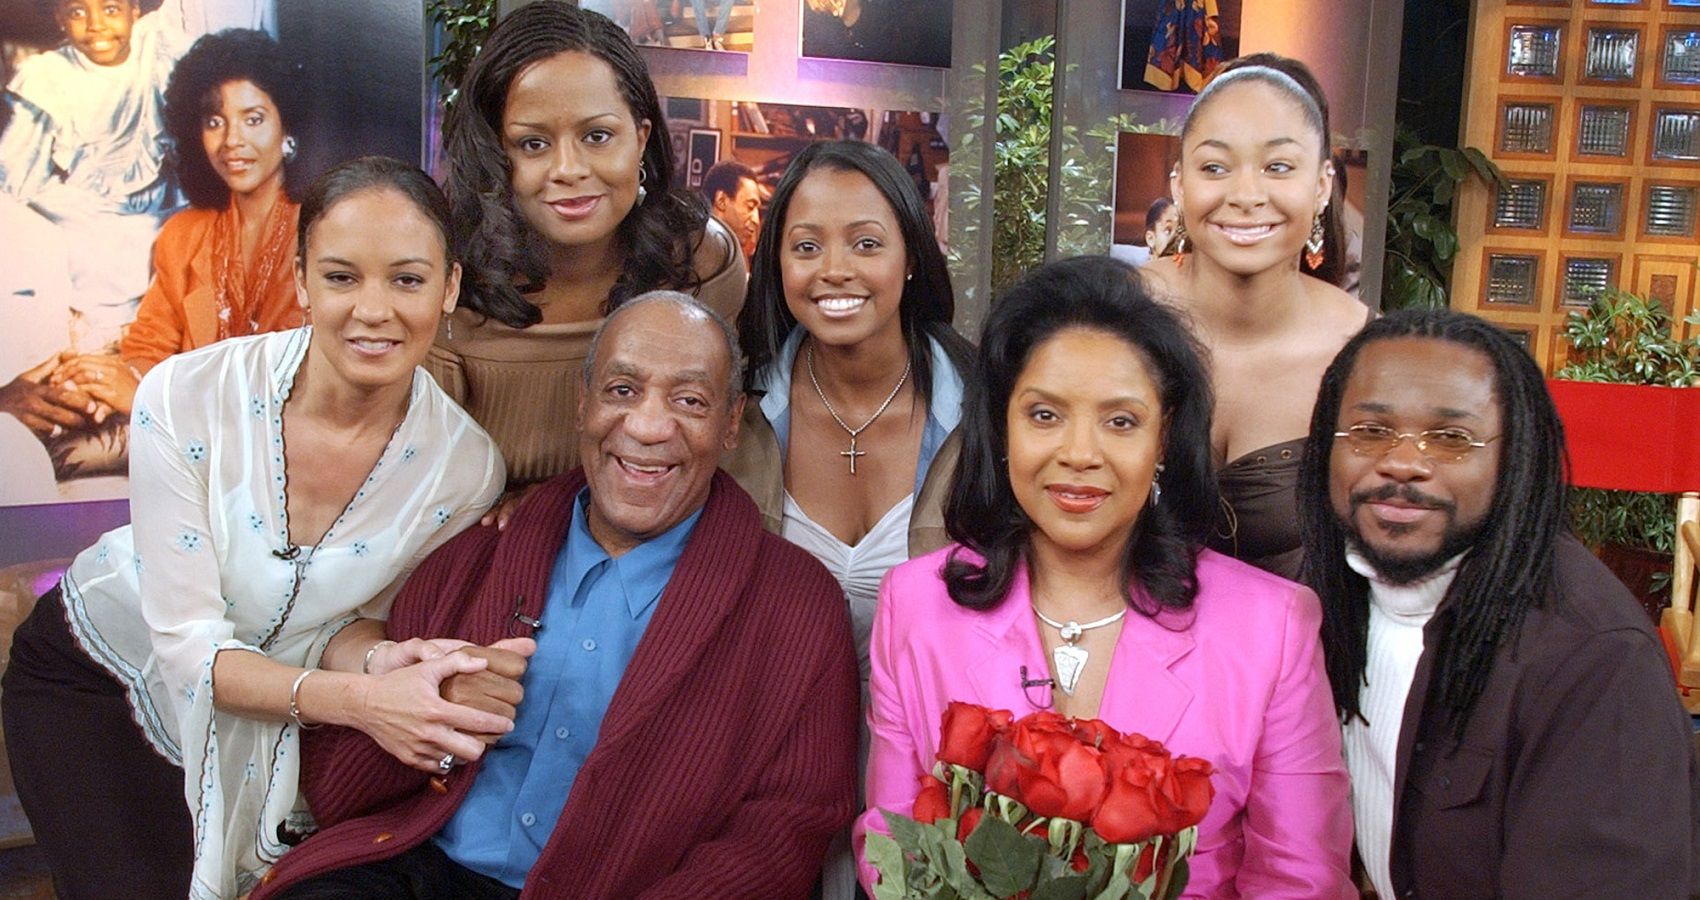 The 'Cosby Show' Kids Were Involved With These Surprising Scandals